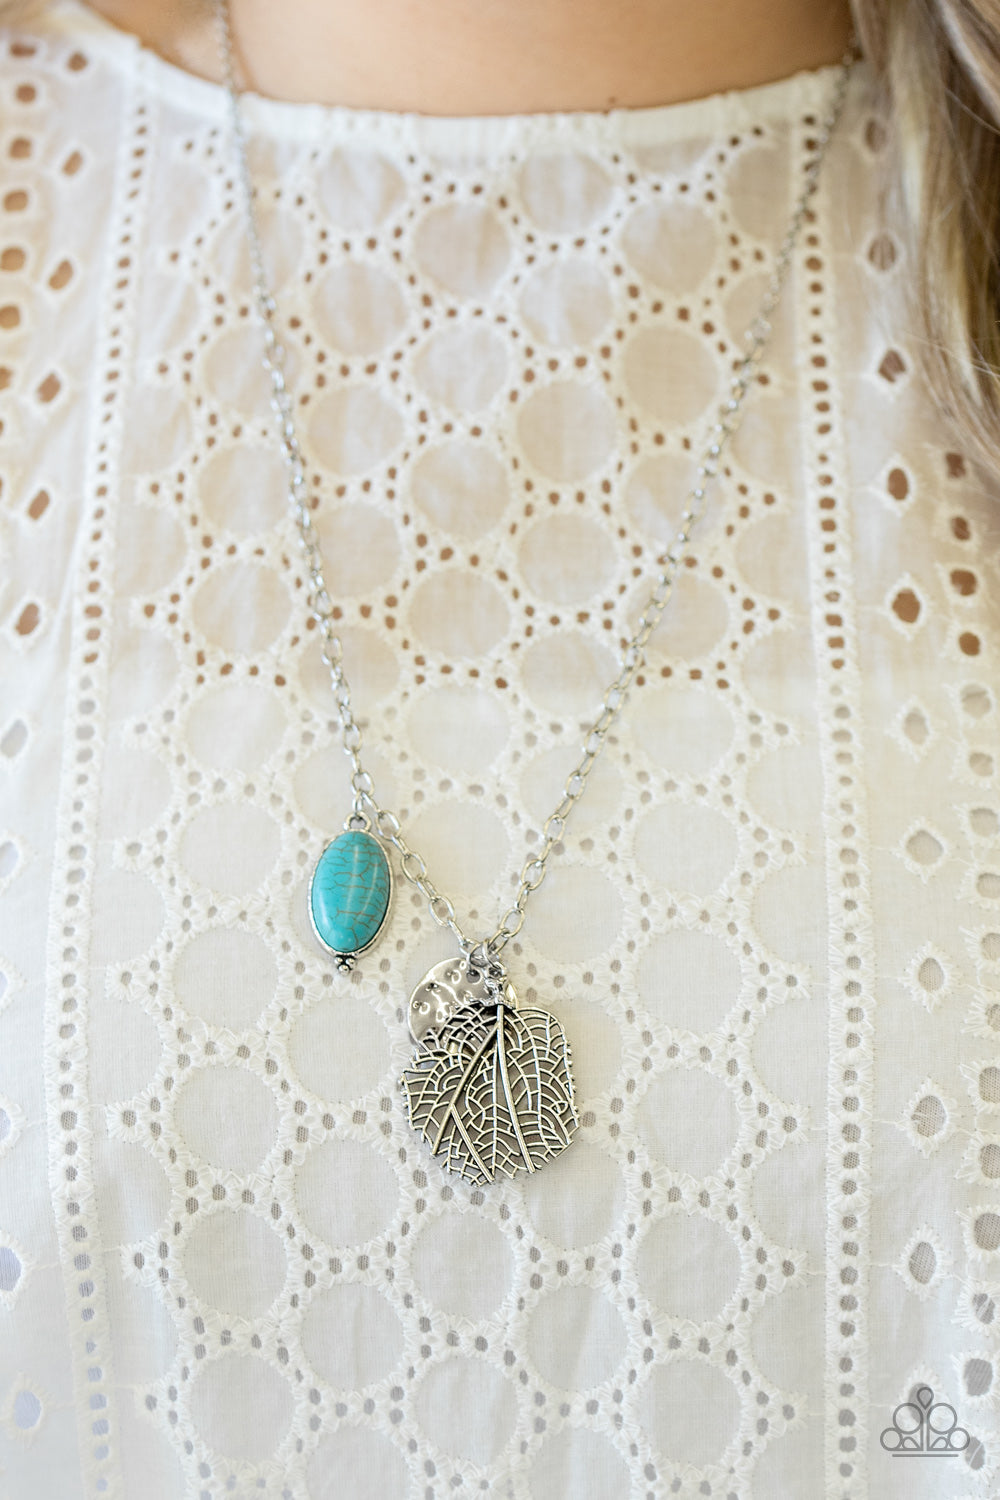 Paparazzi Free-Spirited Forager - Blue - Turquoise Stone - Leaf Charm - Necklace & Earrings - $5 Jewelry with Ashley Swint